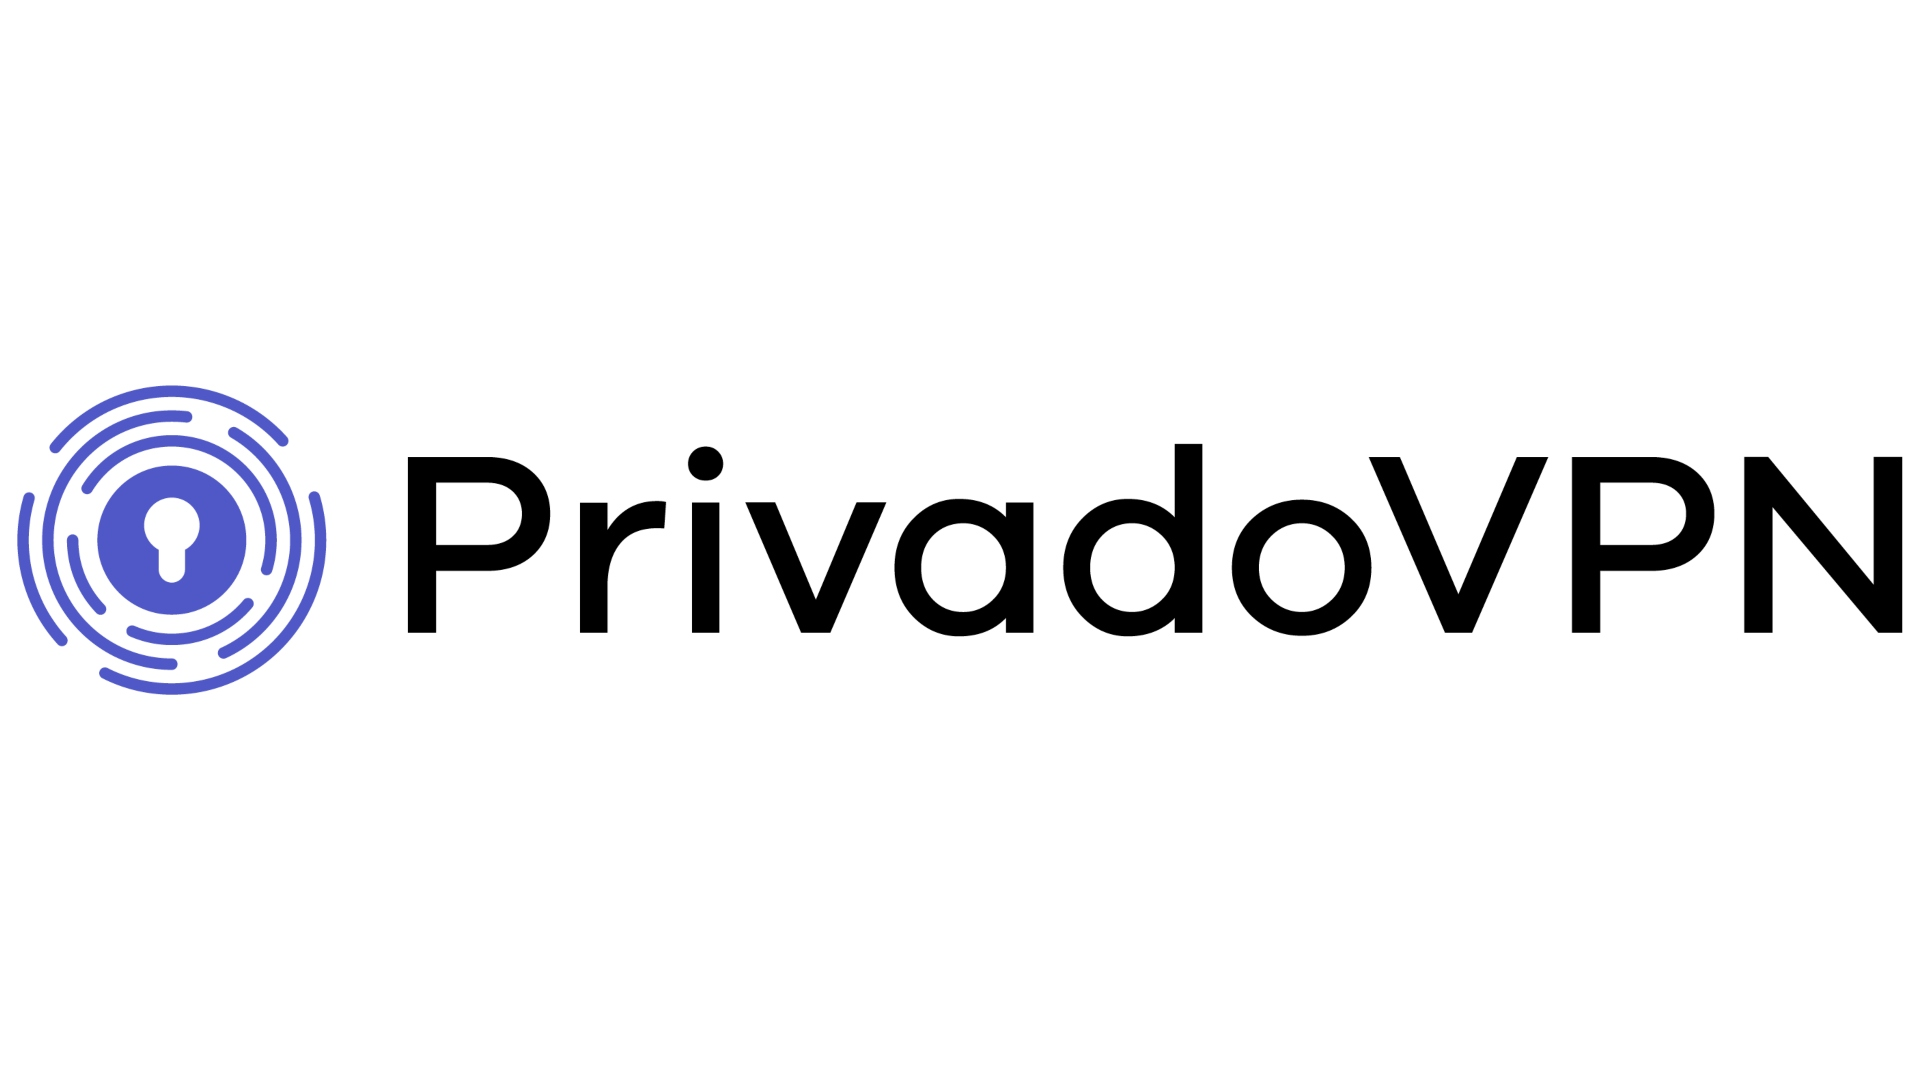 Best YouTube VPN: Privado VPN. Its logo is on a white background.